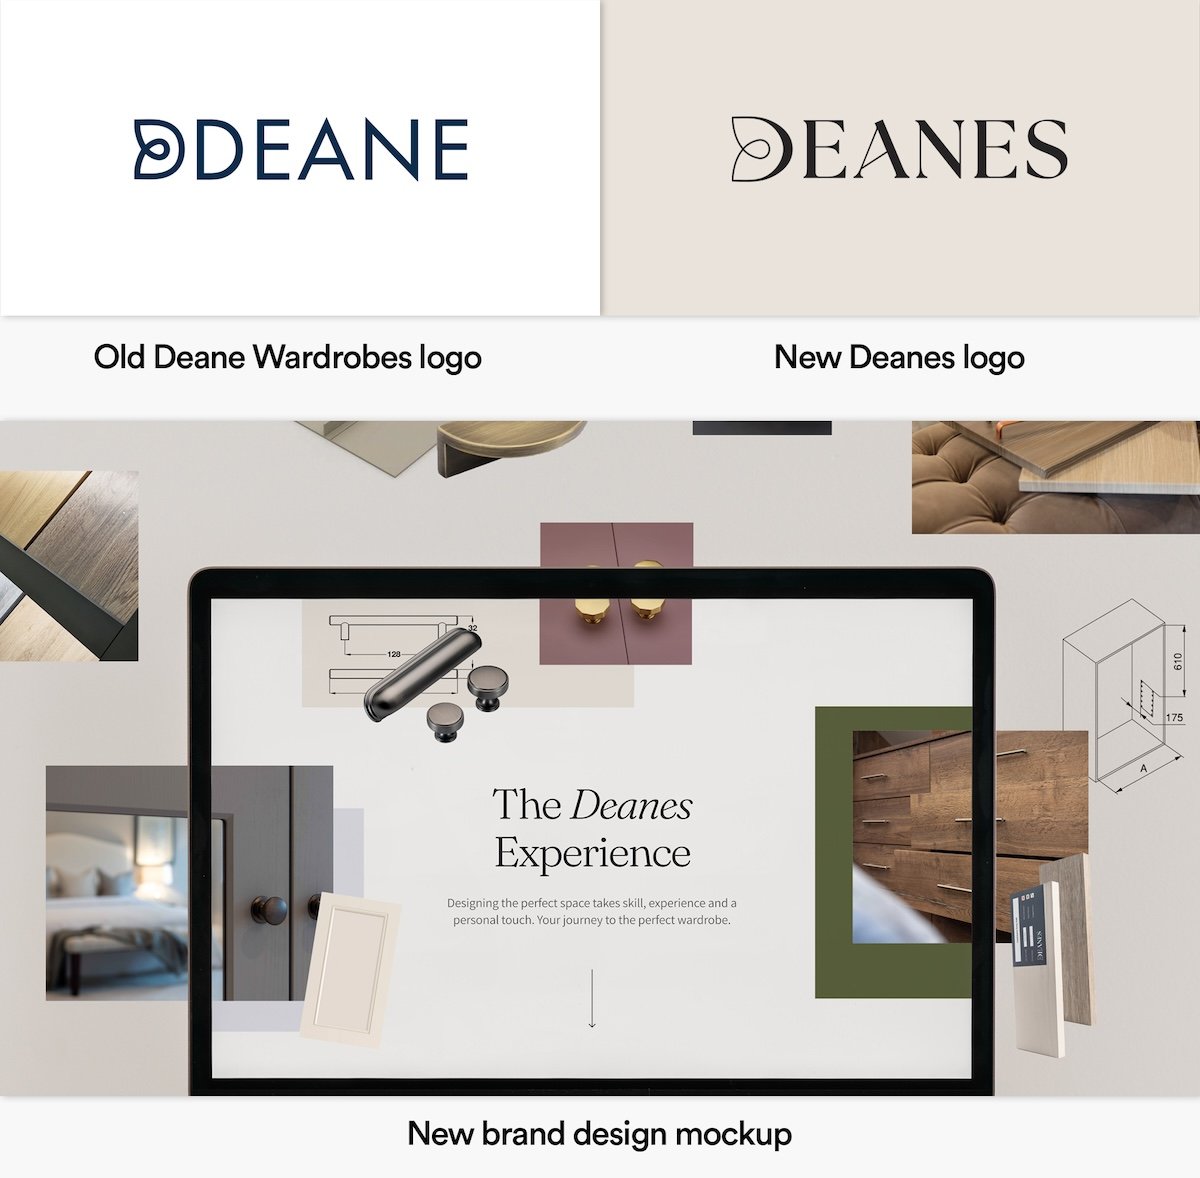 A comparison between the old Deanes logo which was dark blue with a white background, and the new Deanes logo which is black with a beige pastel background.